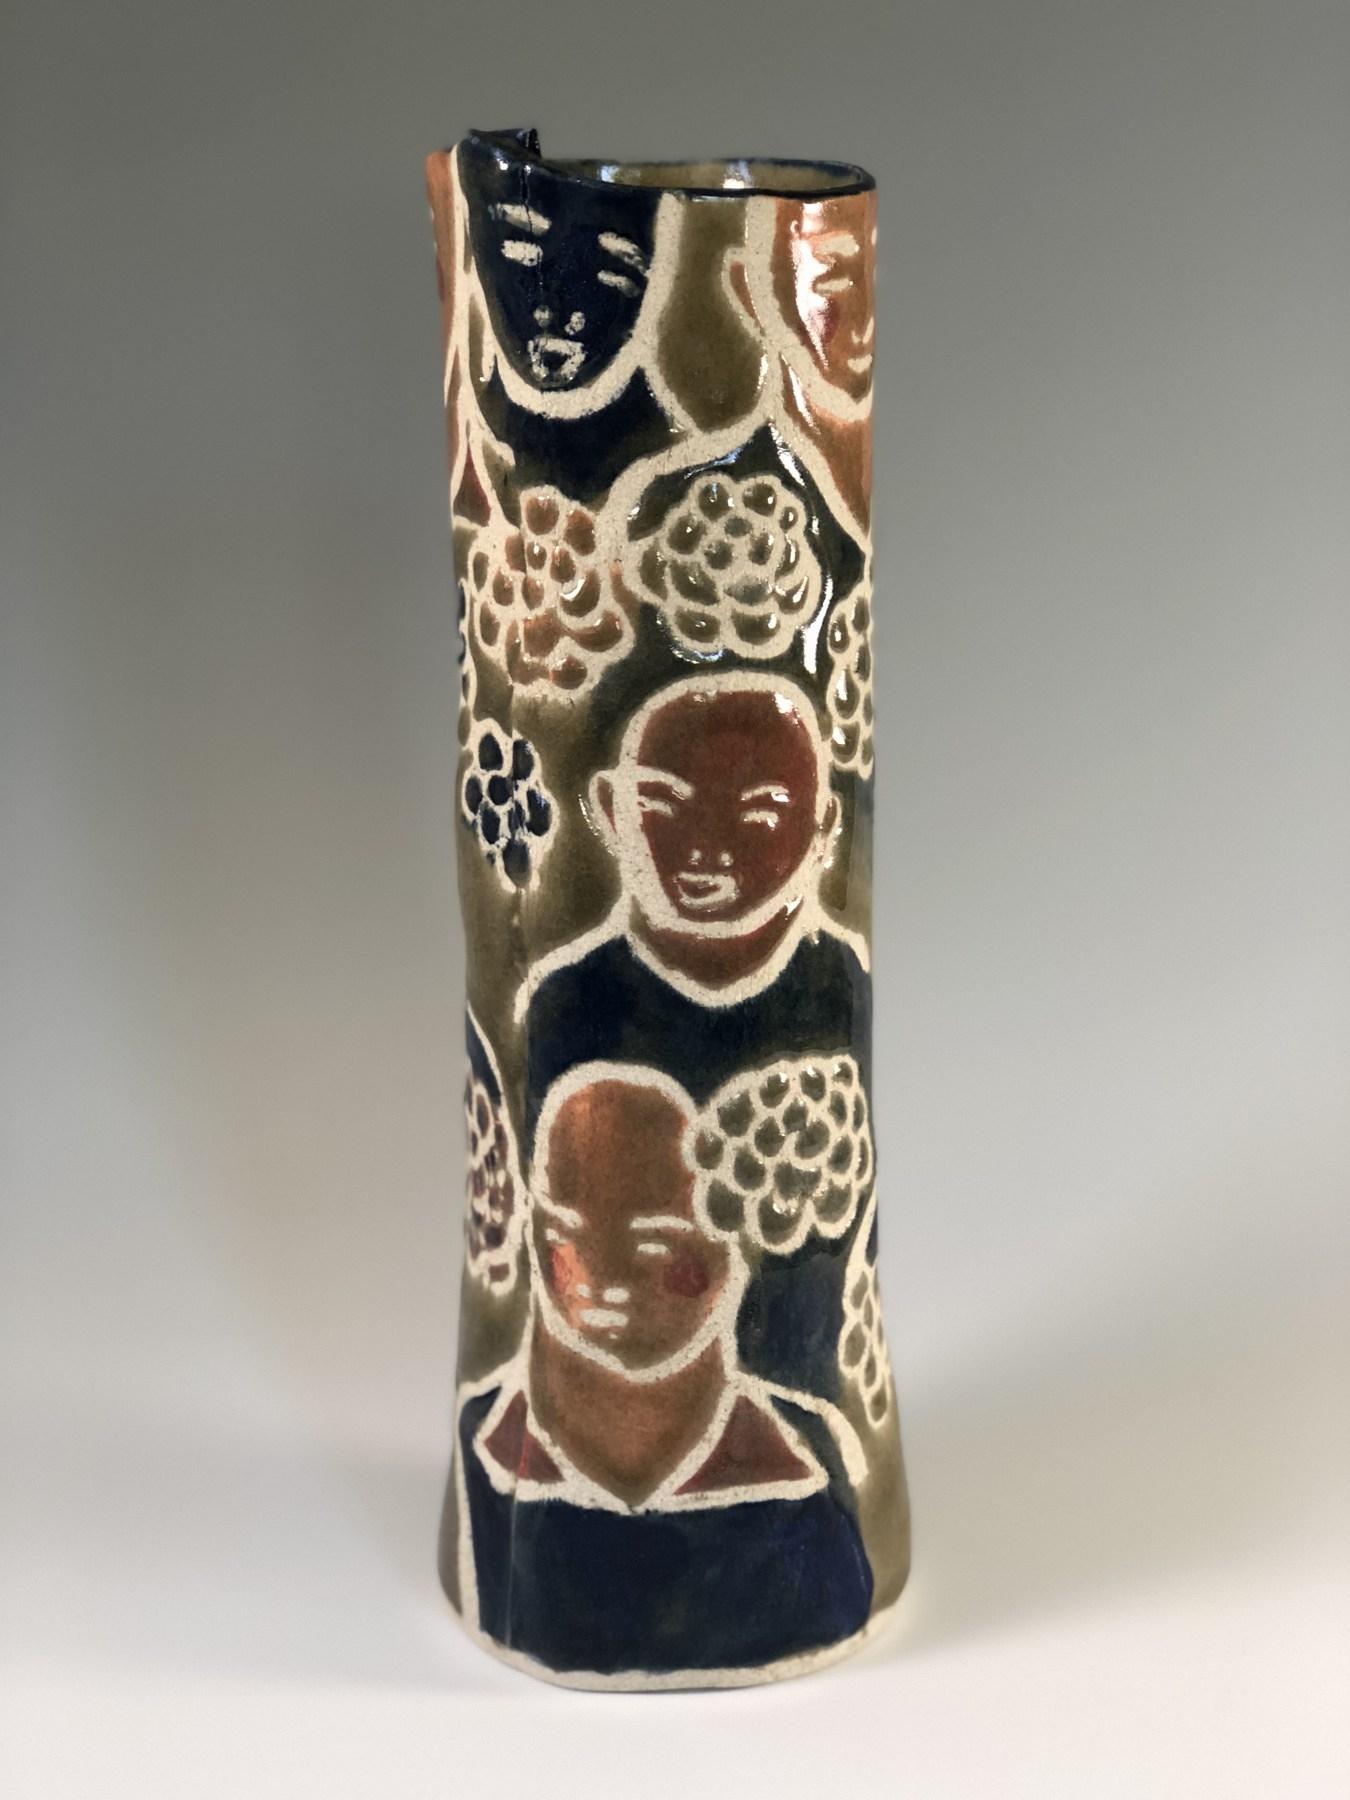 Elizabeth Currer Figurative Sculpture - Tall Cylinder with People and Flowers